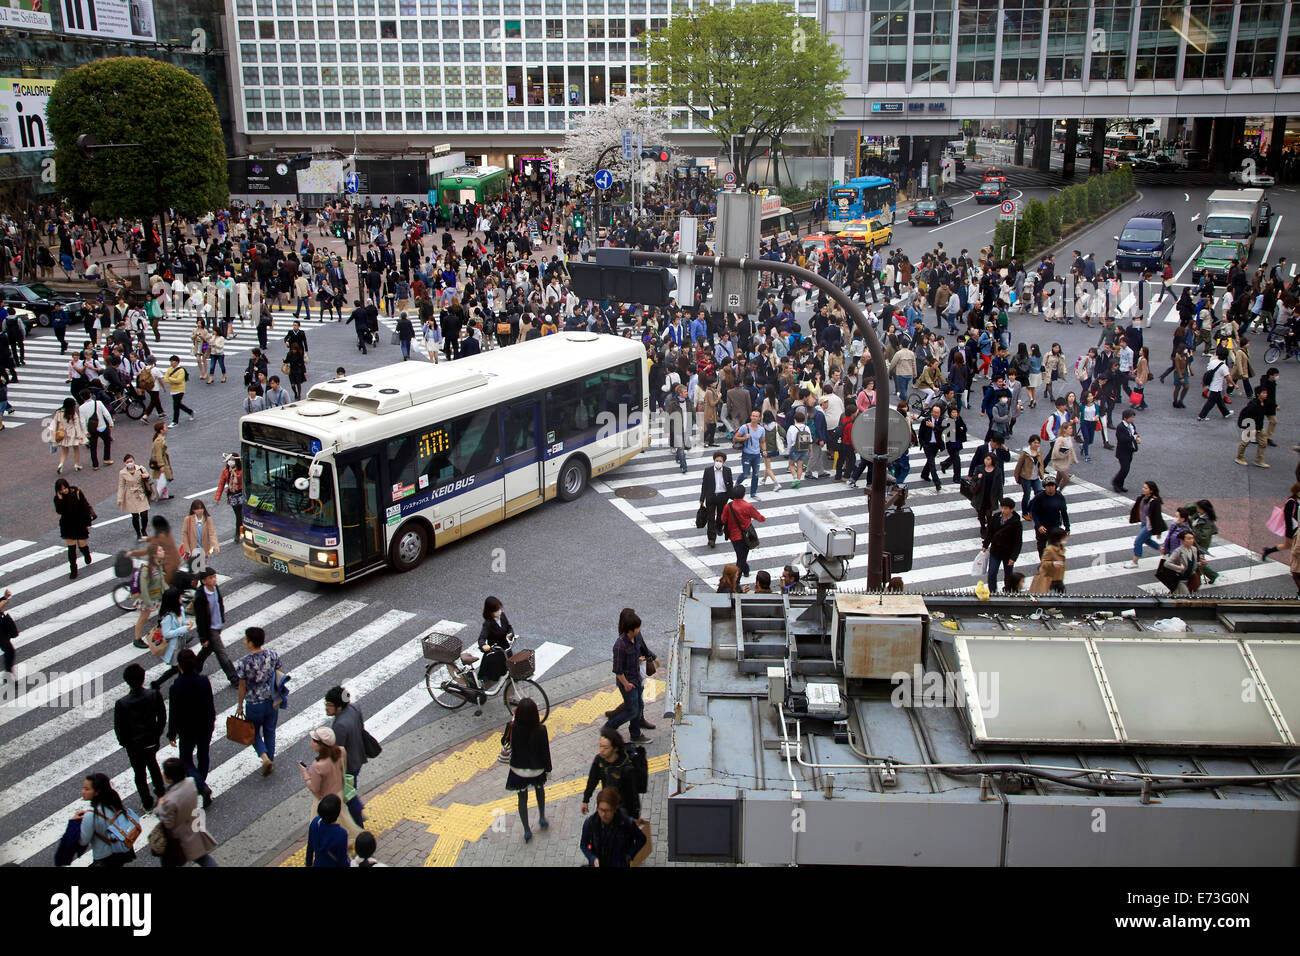 Shibuya crossing in Tokyo, Japan, Asia. One of the busiest intersections in the world. Street, road, pedestrians, people, traffic, cars Stock Photo